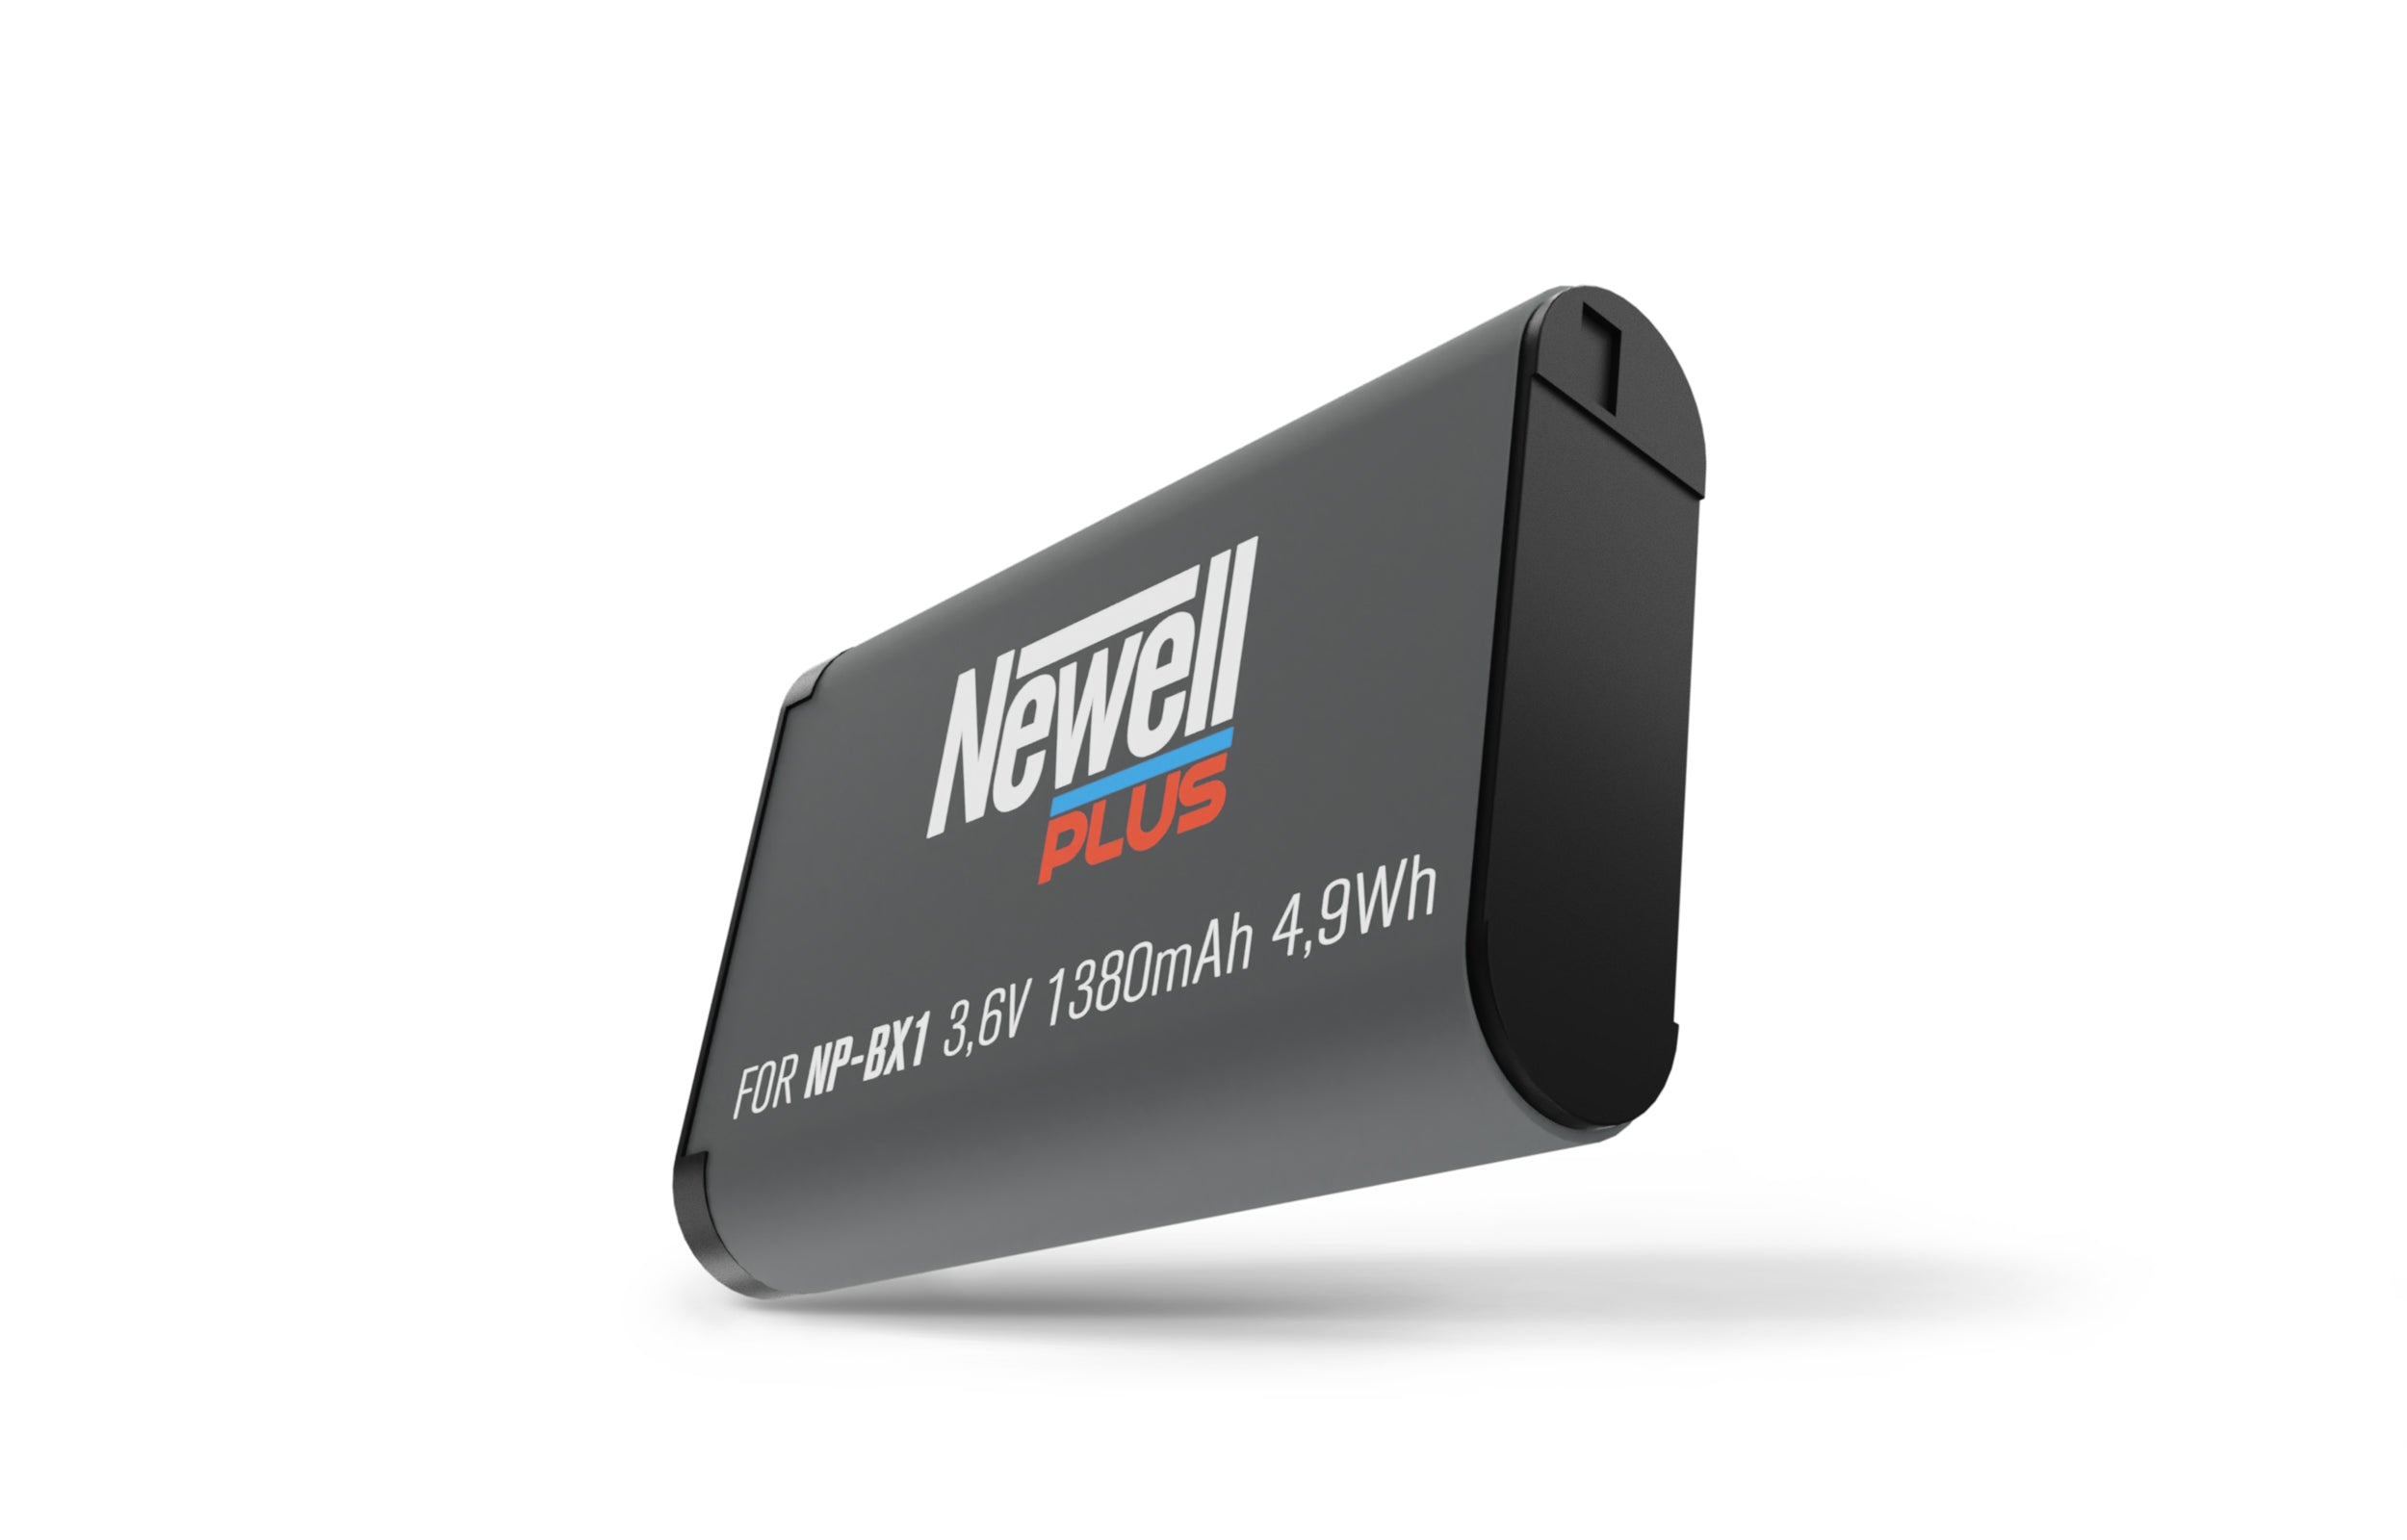 Newell PLUS battery NP-BX1